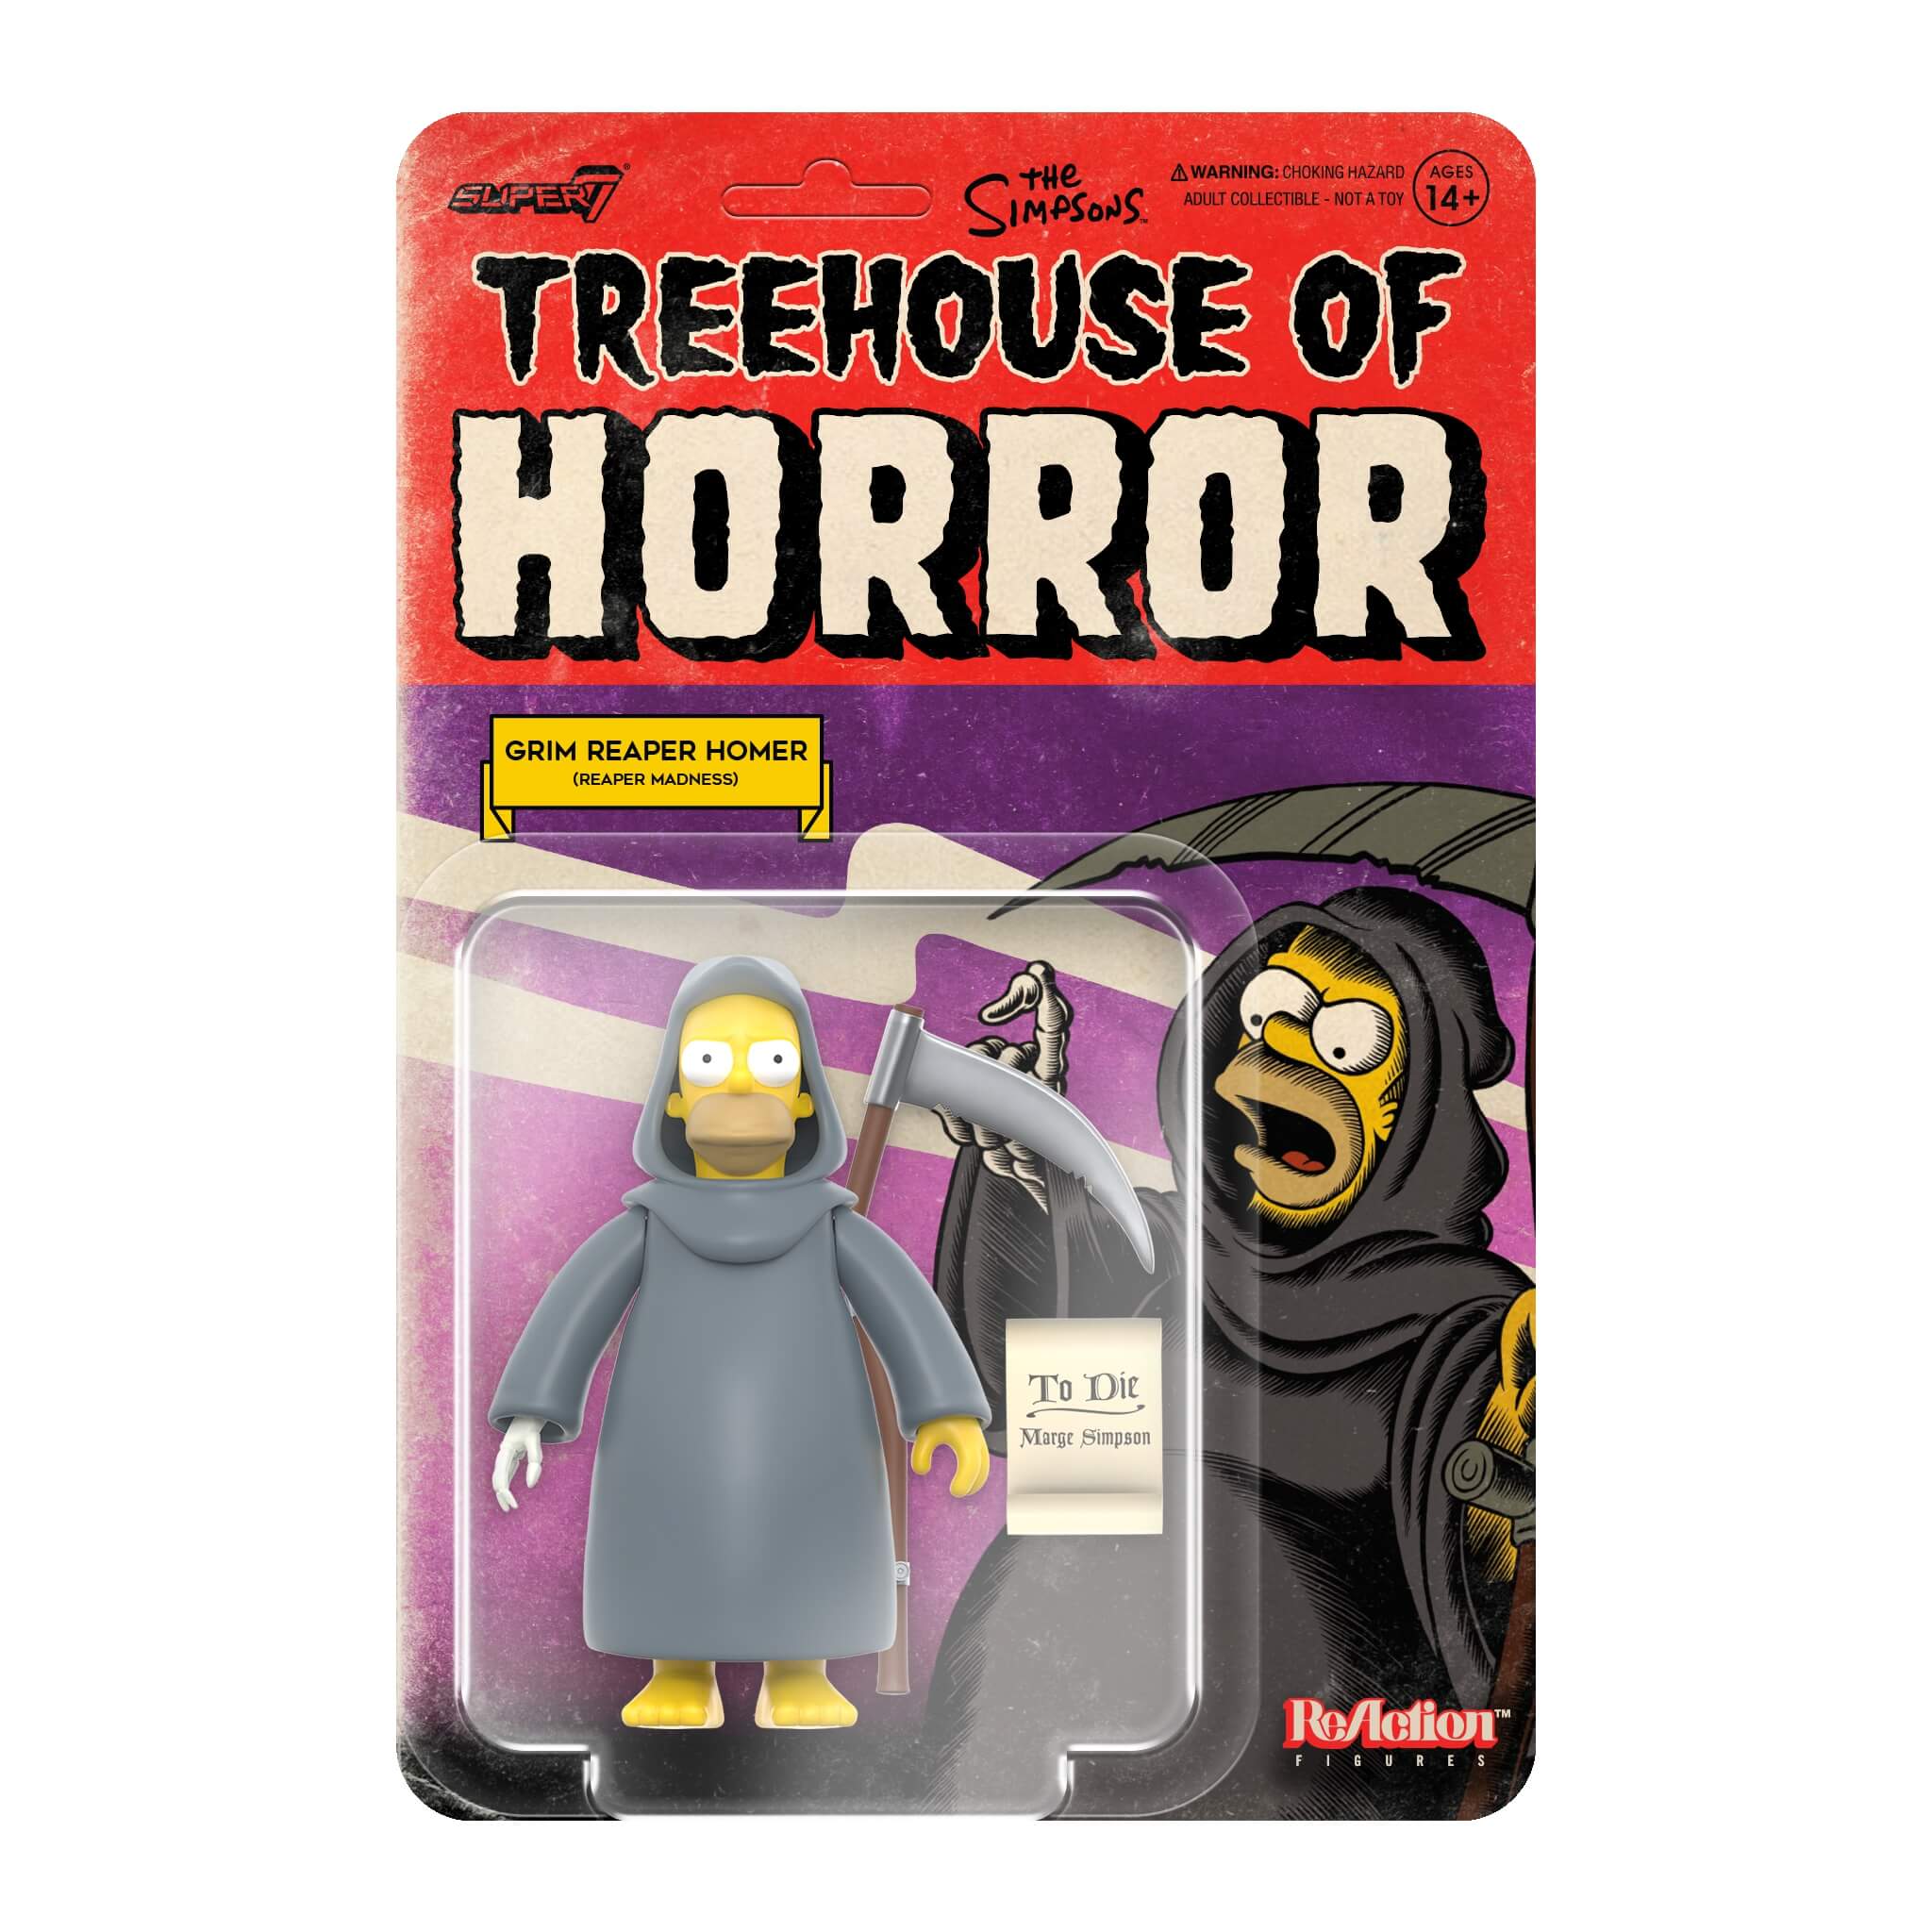 The Simpsons ReAction W3 - Treehouse of Horror - Grim Reaper Homer